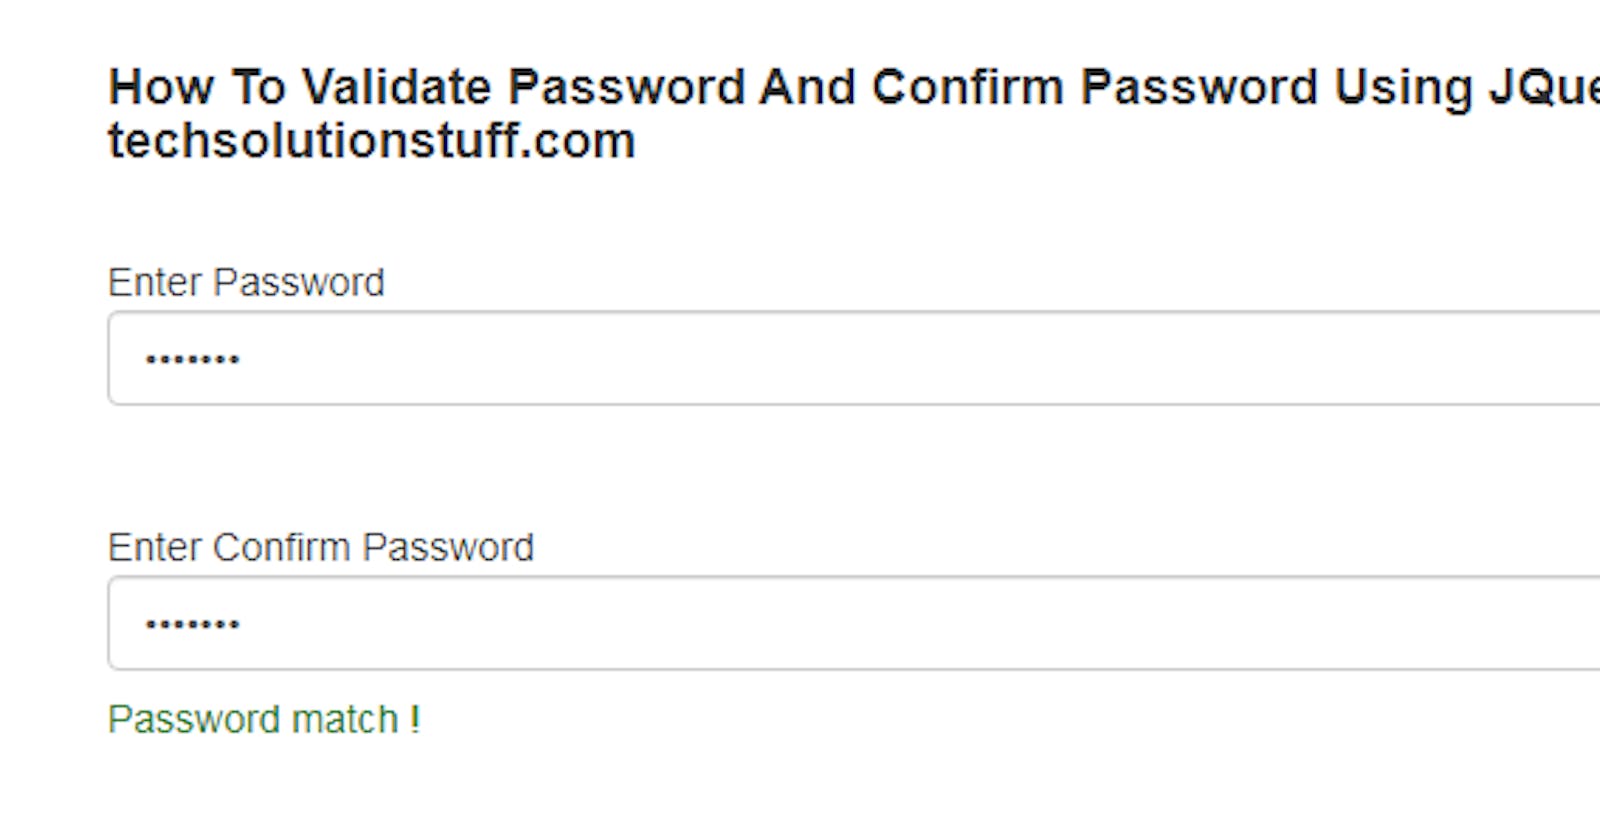 How To Validate Password And Confirm Password Using JQuery